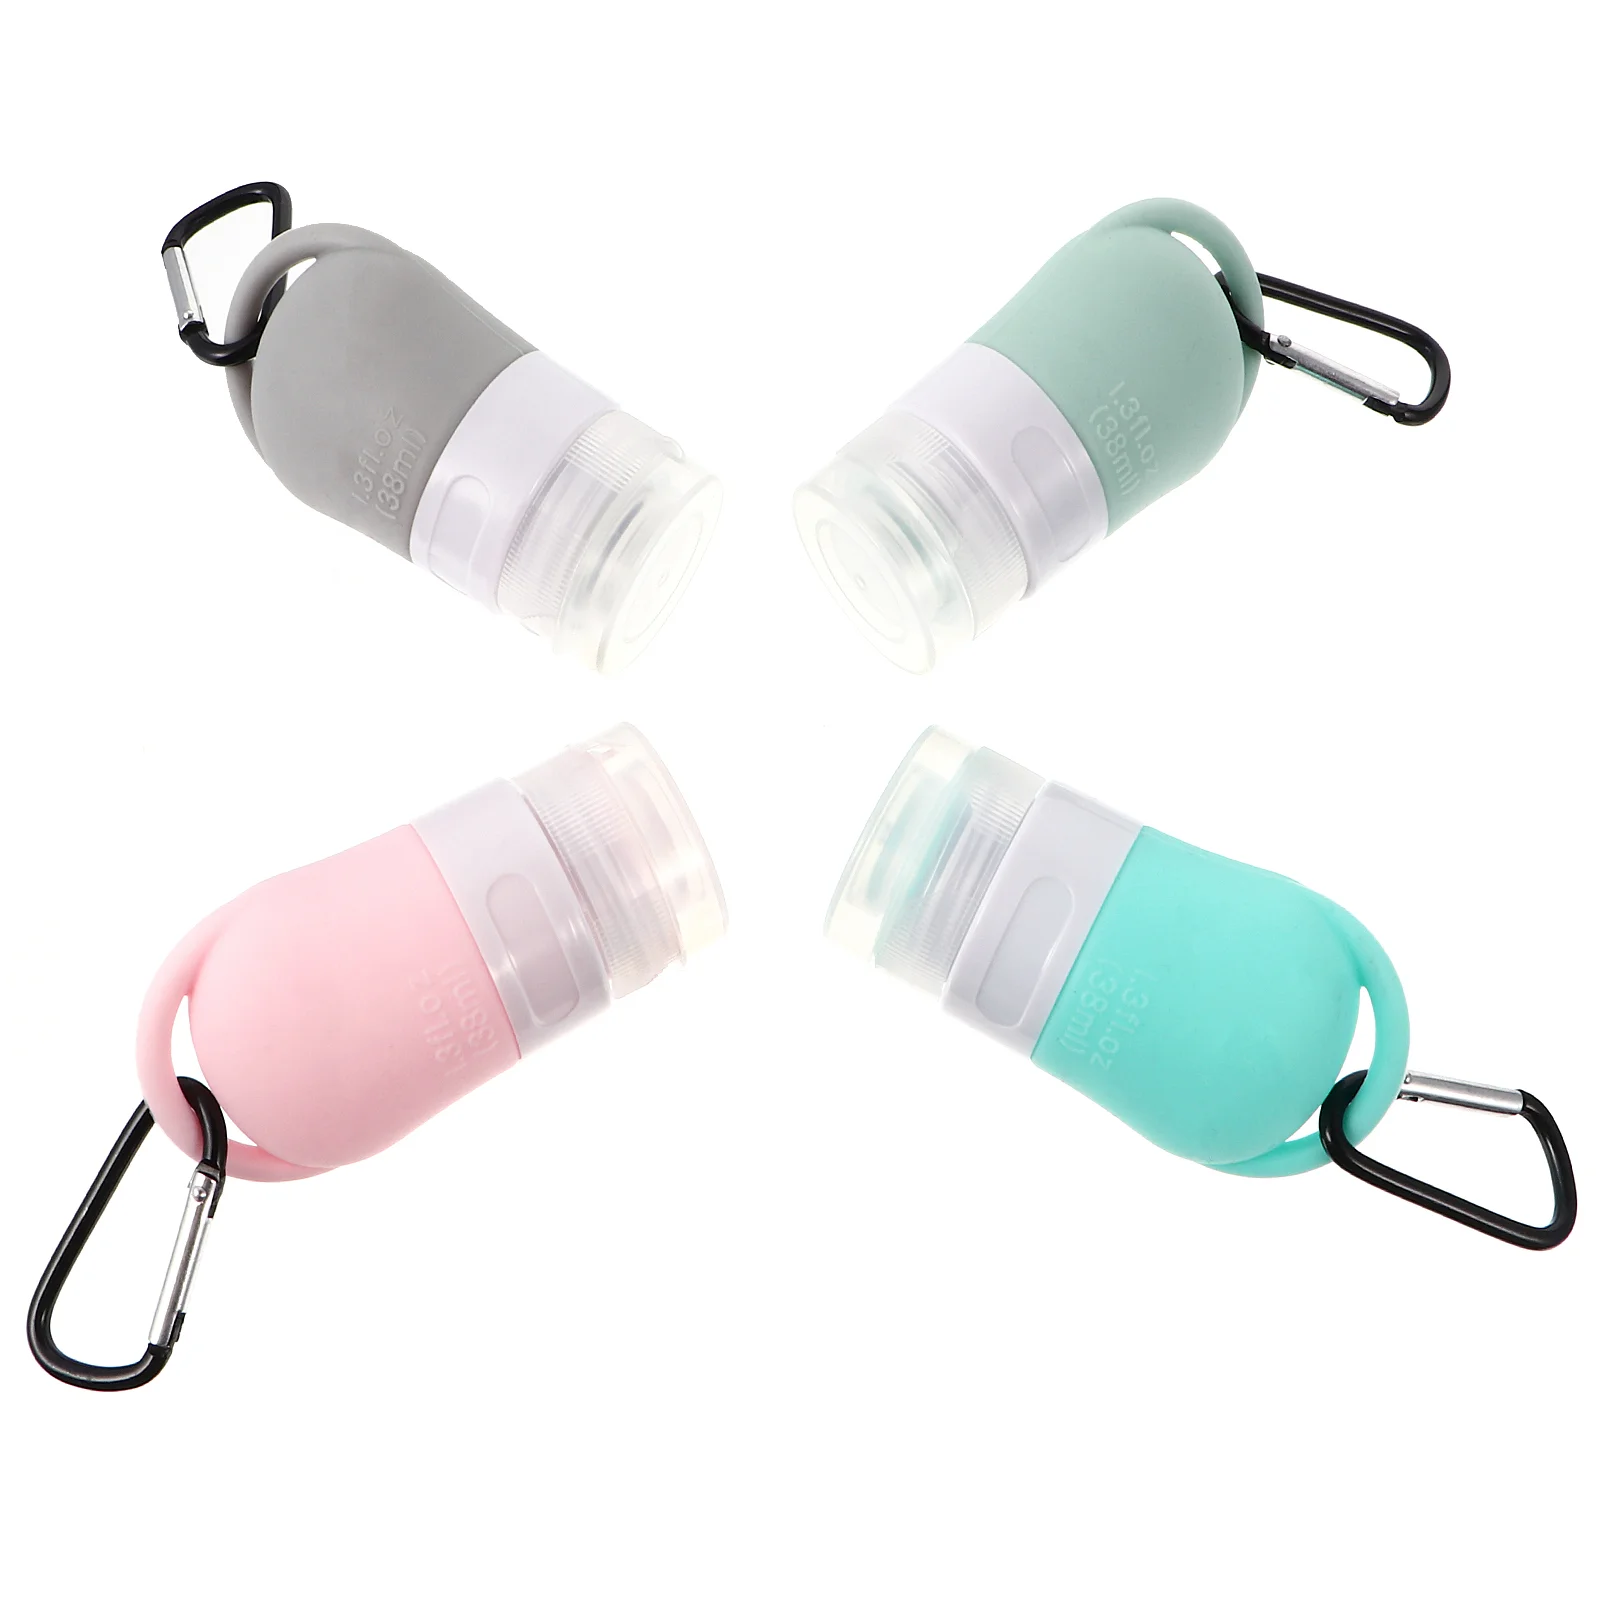 

4 Pcs Silicone Storage Bottle Hand Soap Dispenser Lotion Bottles Makeup Containers Shower Gel Silica Travel Refillable